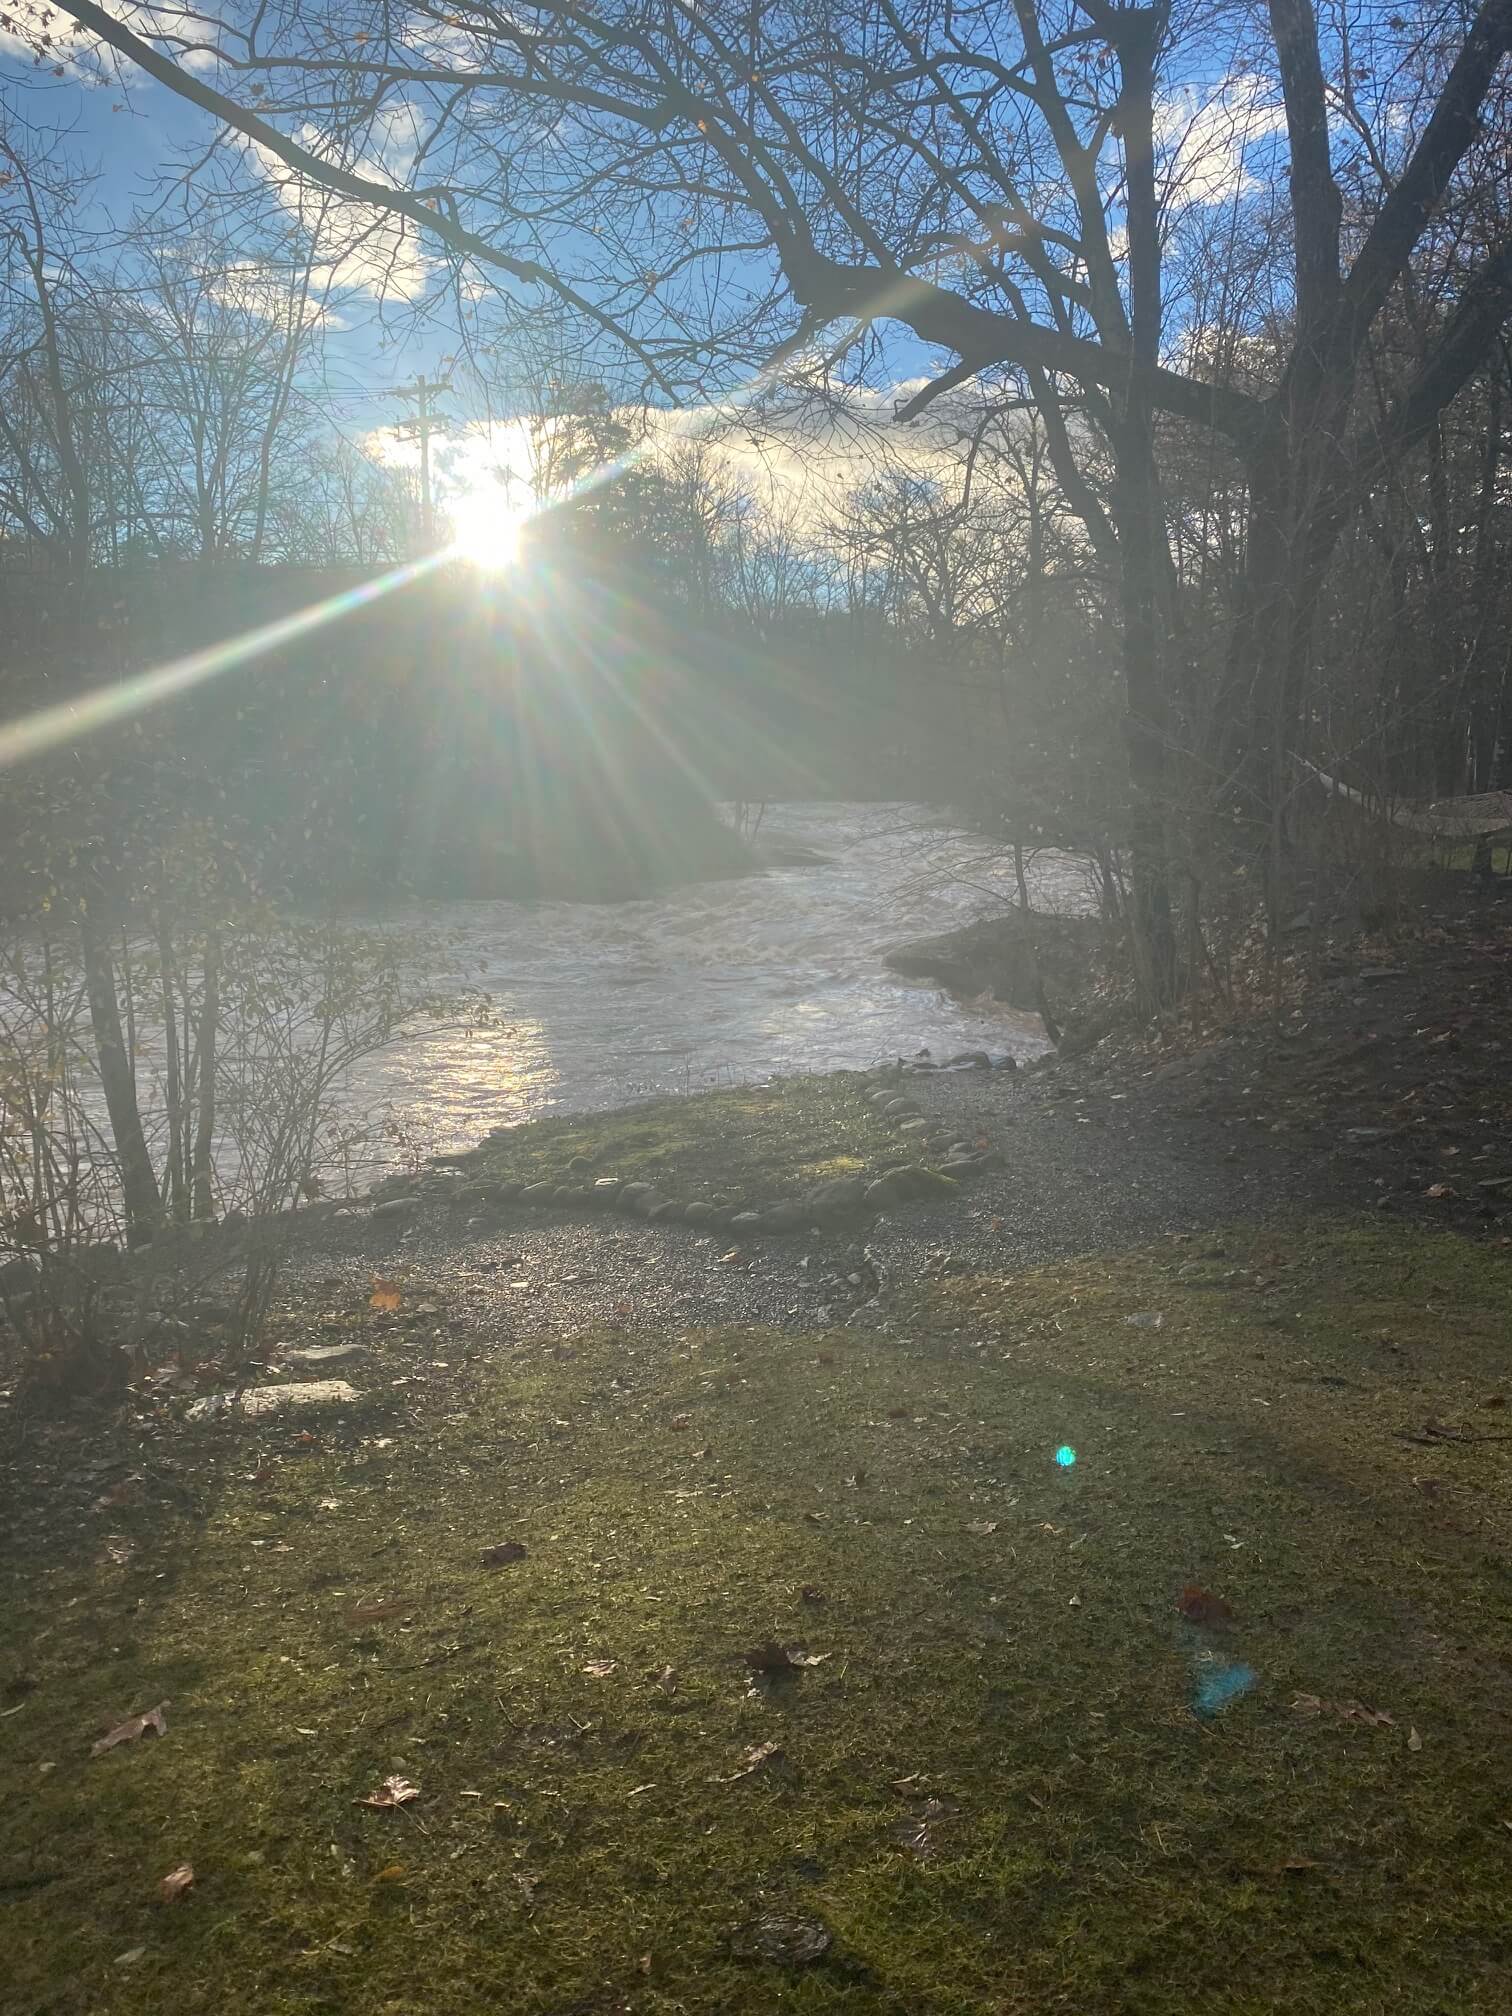 The sun shining through trees upon a brown stream and trees with no leaves 